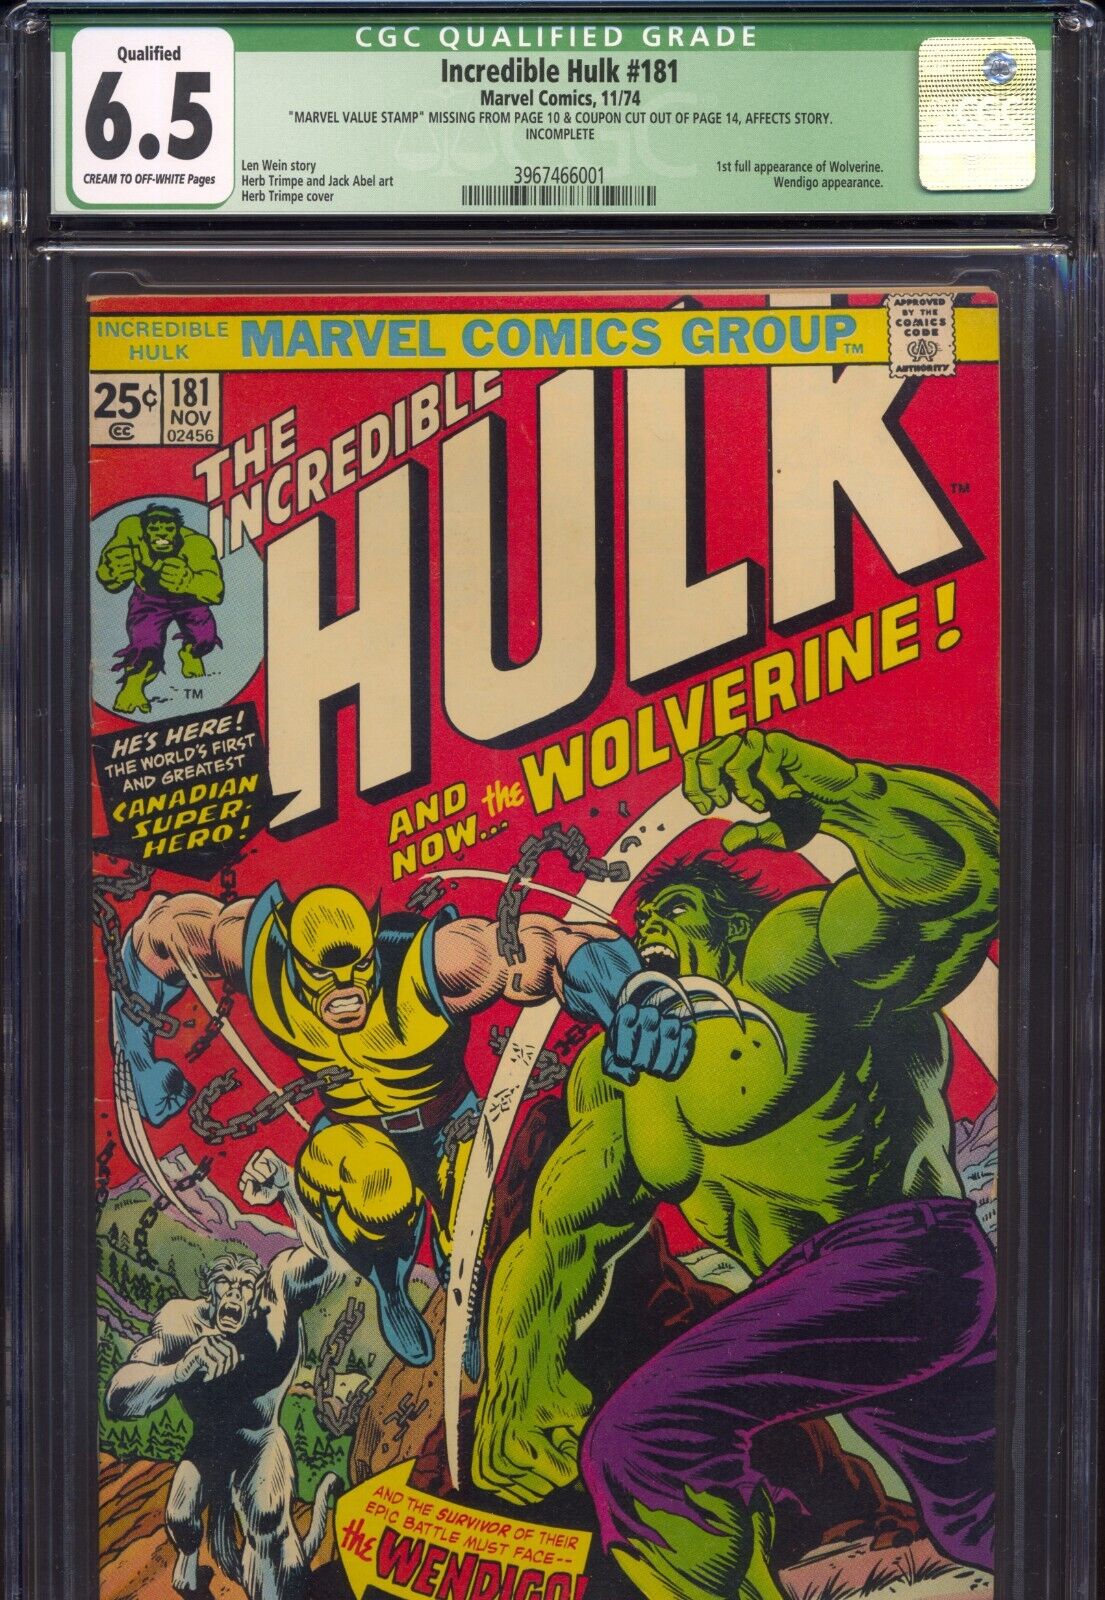 Incredible Hulk 181 1974 1st full Wolverine CGC Qualified 65 READ LABEL